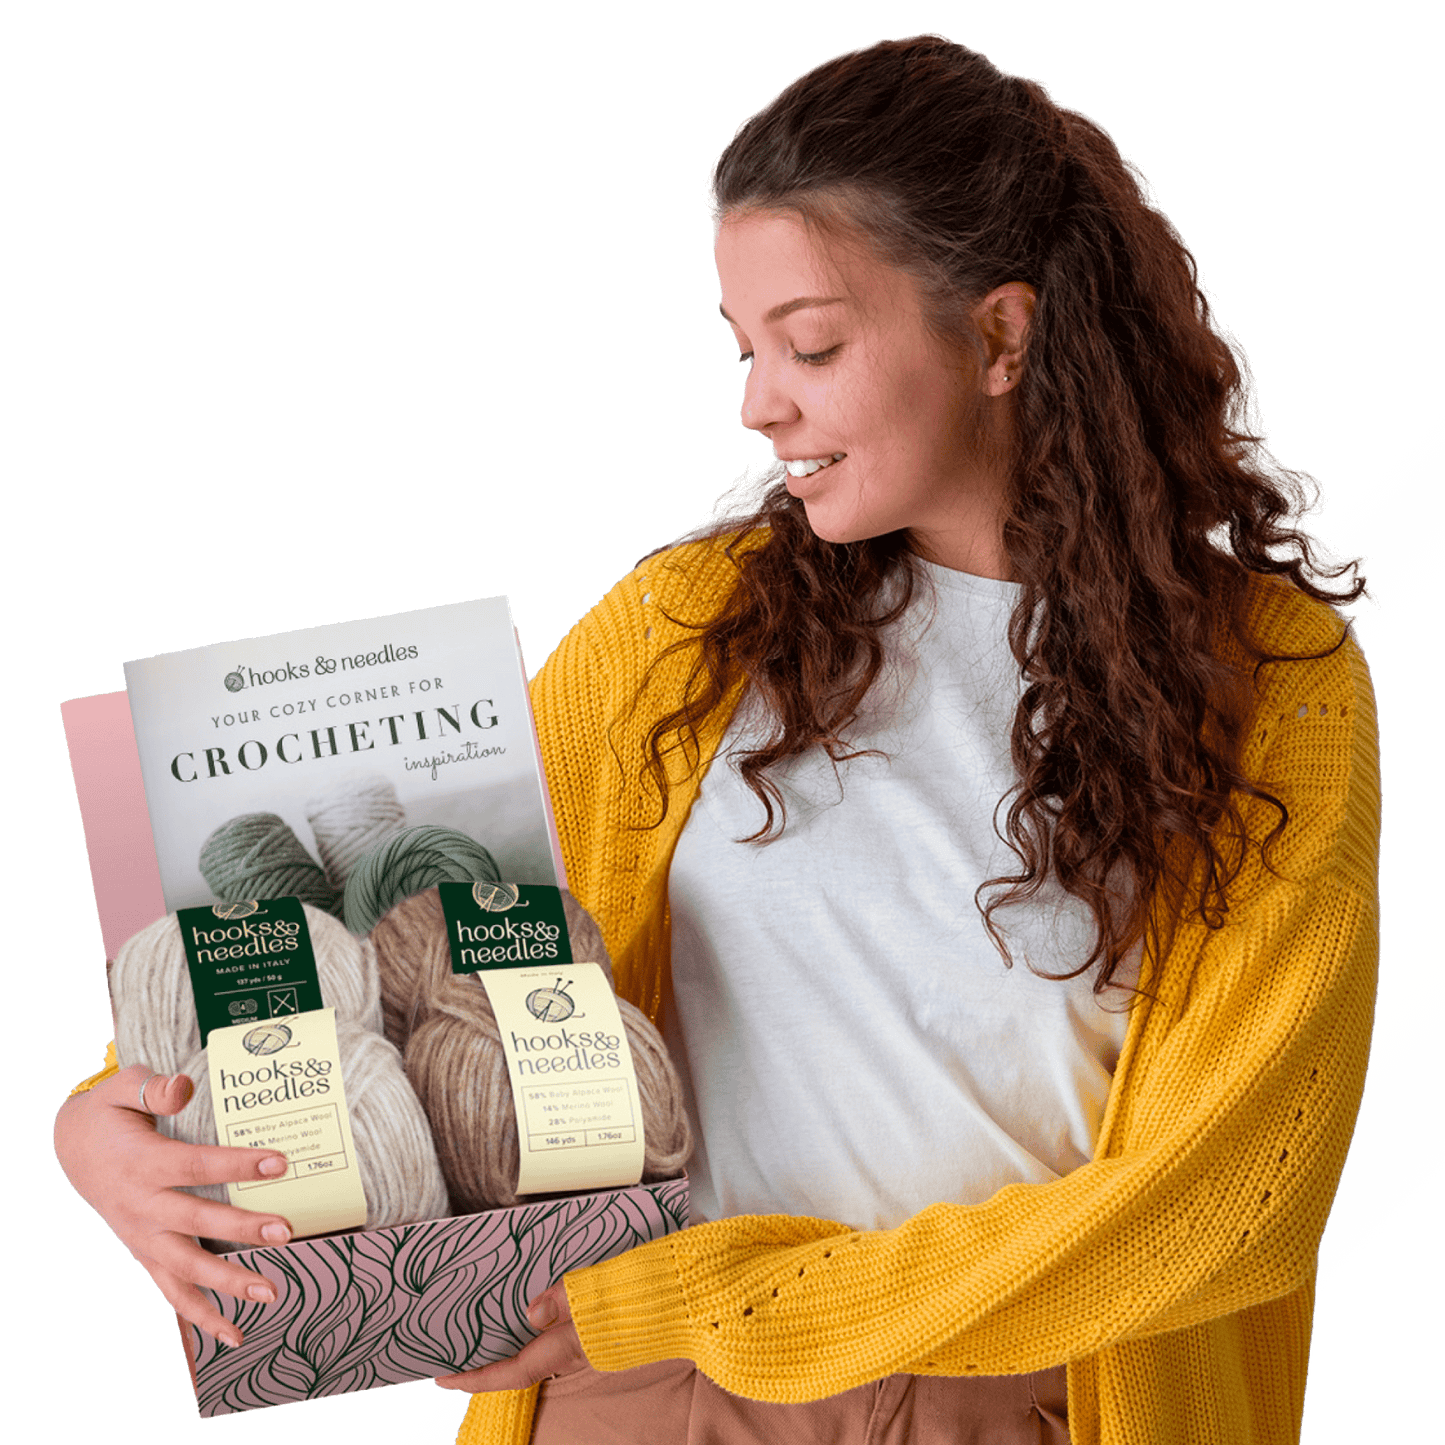 Woman in a yellow cardigan smiling at a [6-Month-Prepaid] Hooks & Needles Subscription Box #20 she is holding, with assorted yarn beside her, against a split background of white and light green.